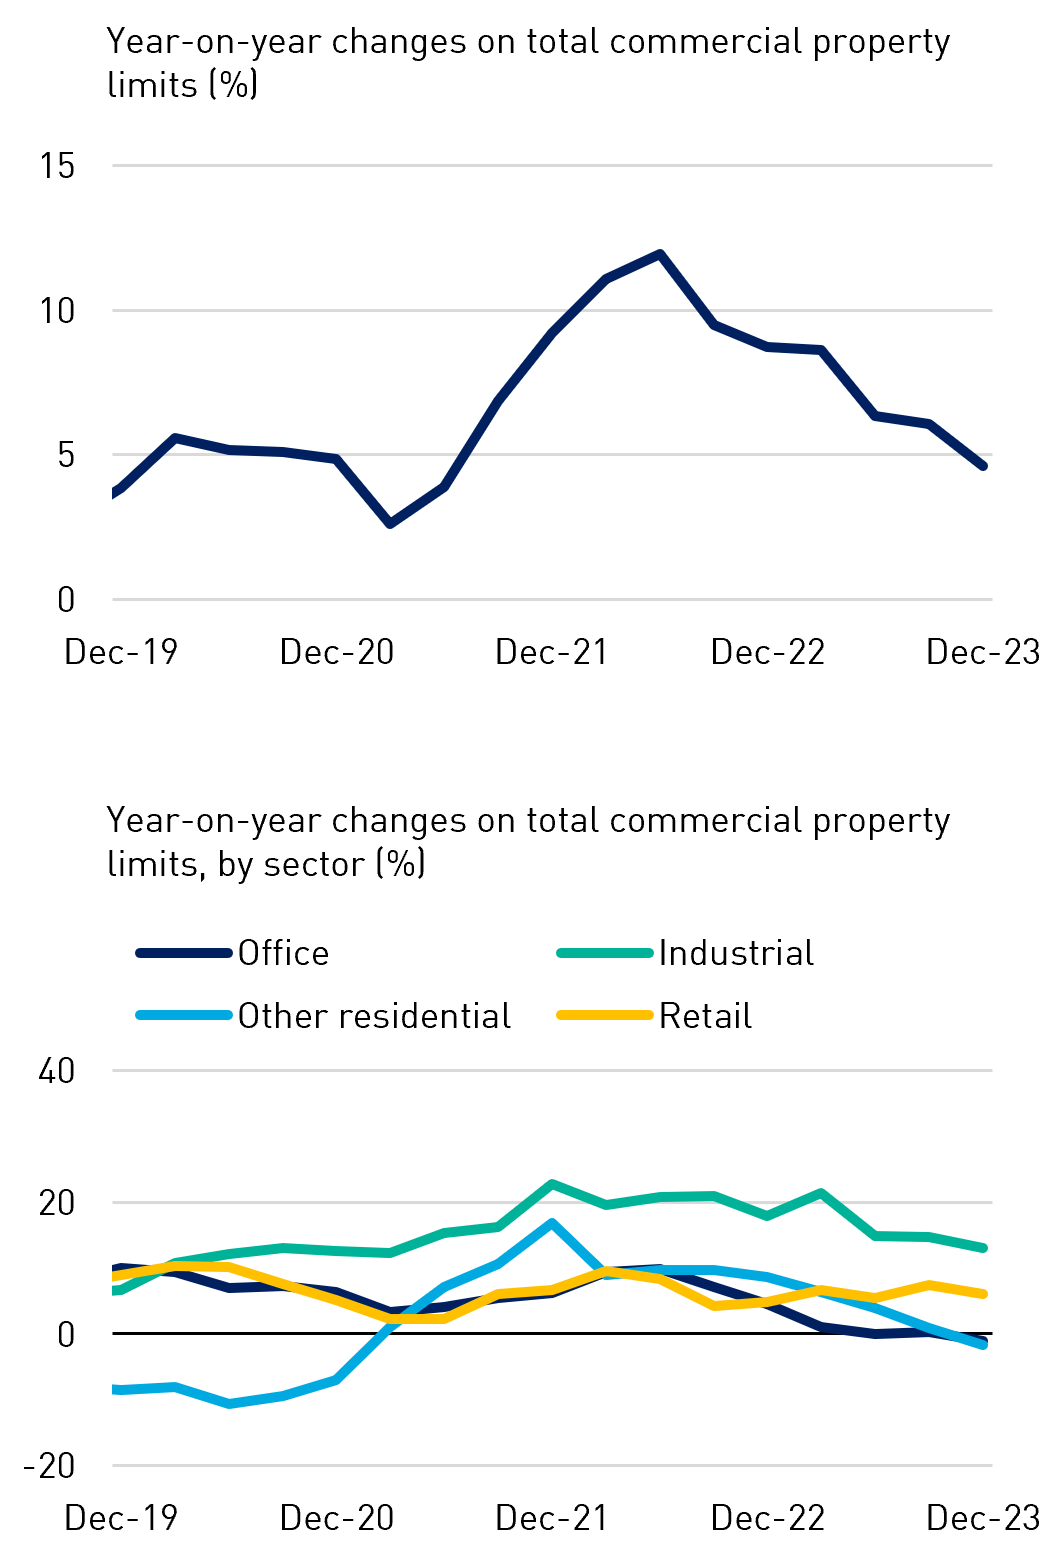 Year-on-year changes on total commercial property limits (%) and Year-on-year changes on total commercial property limits, by sector (%)